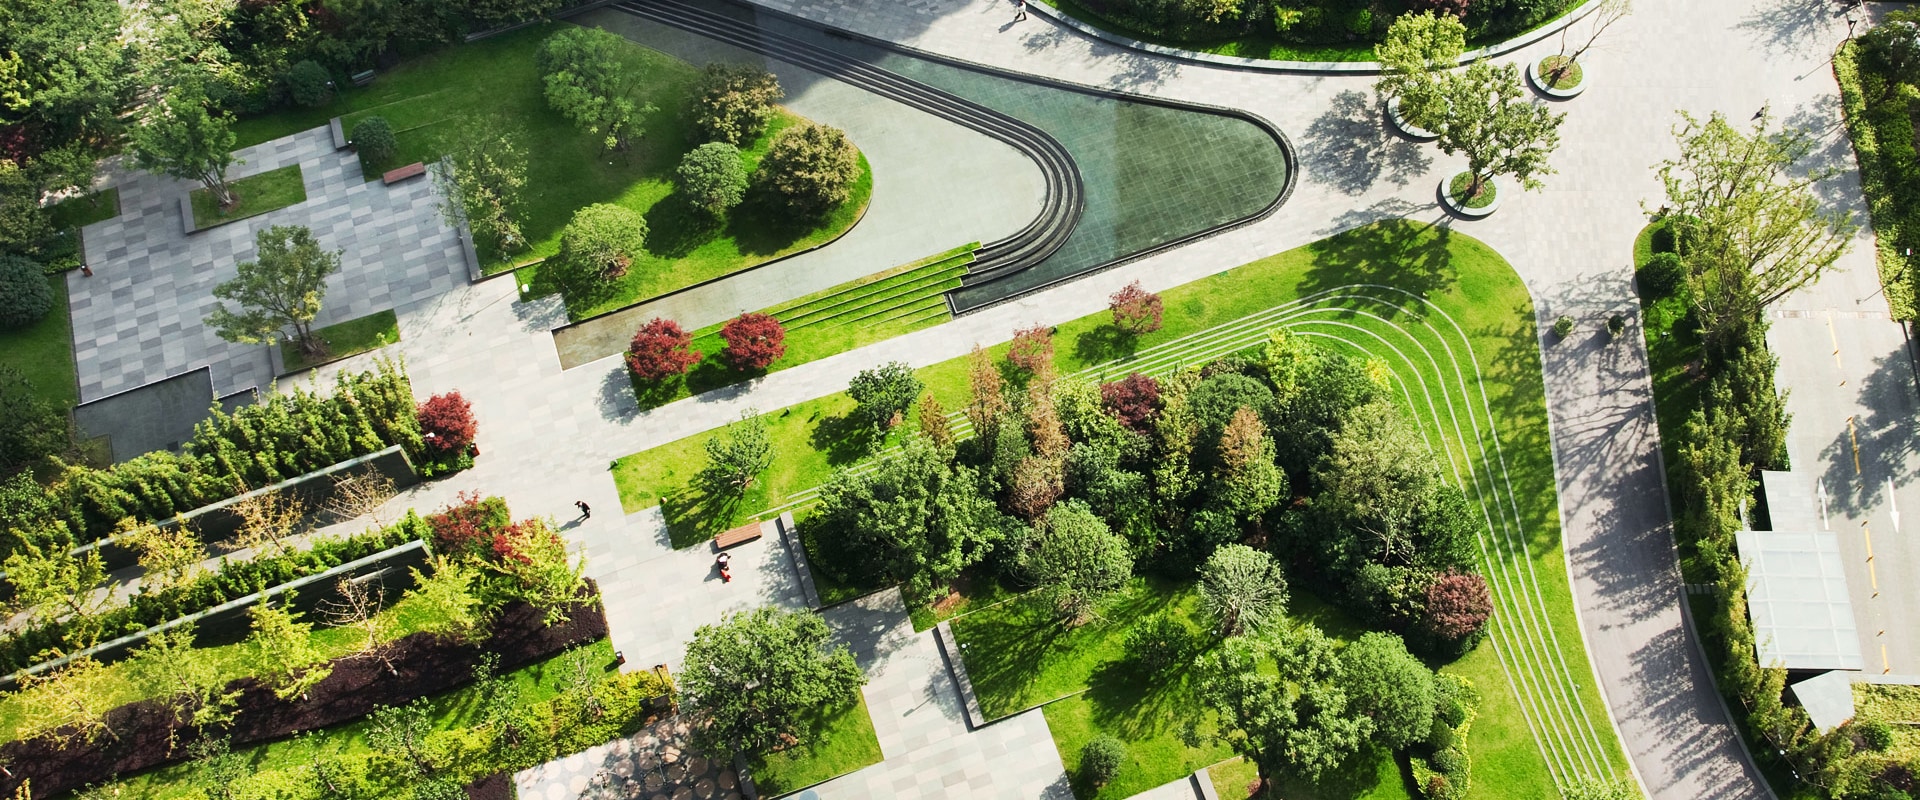 Are landscape architects and architects the same?